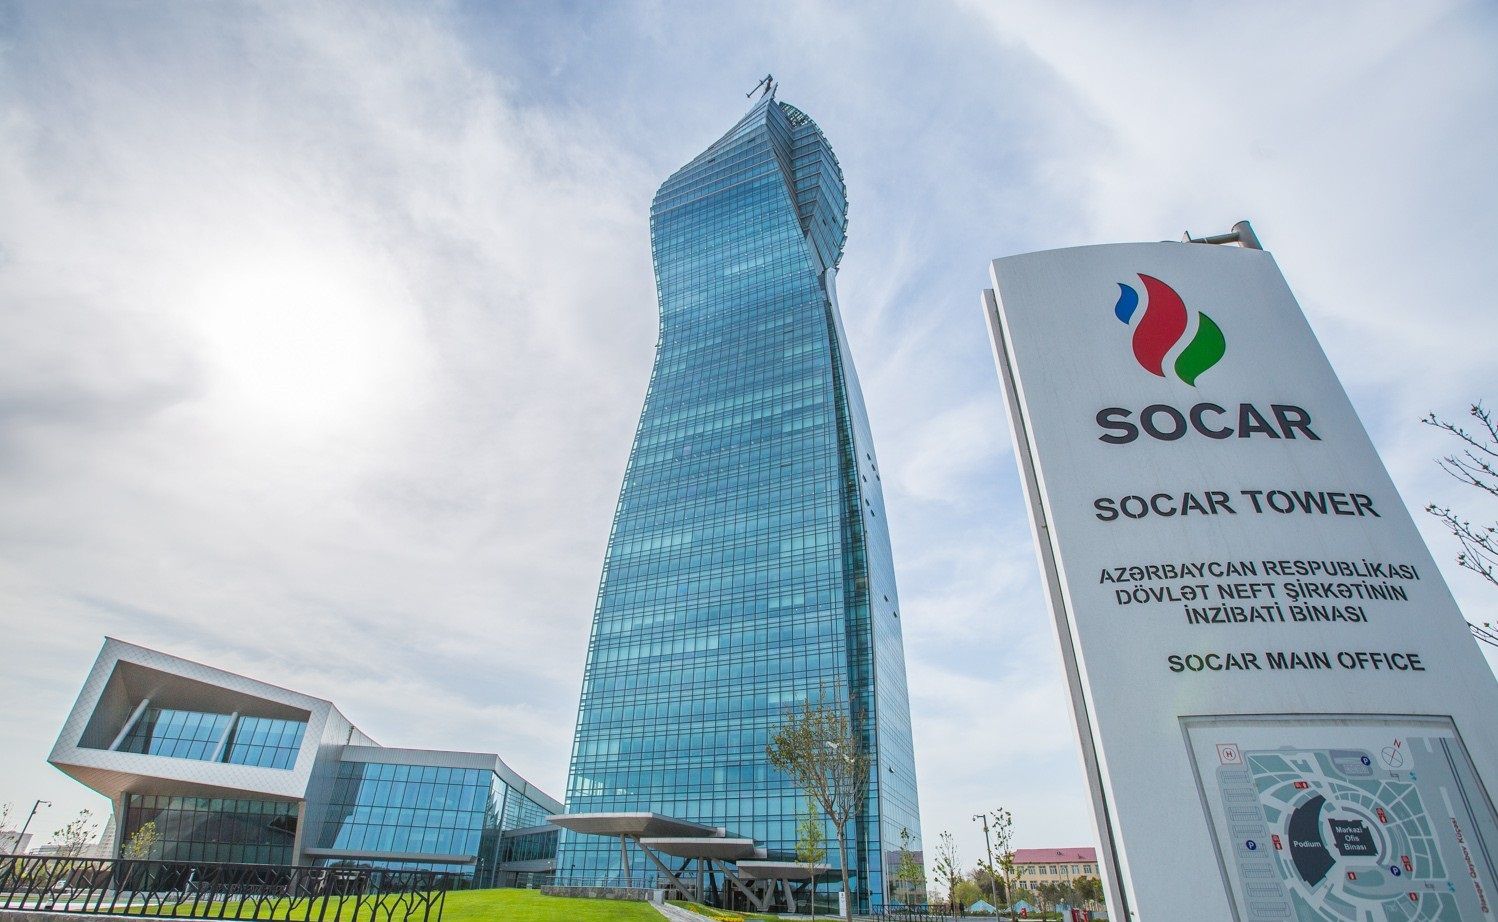 SOCAR targets zero carbon dioxide emissions from oil and gas production